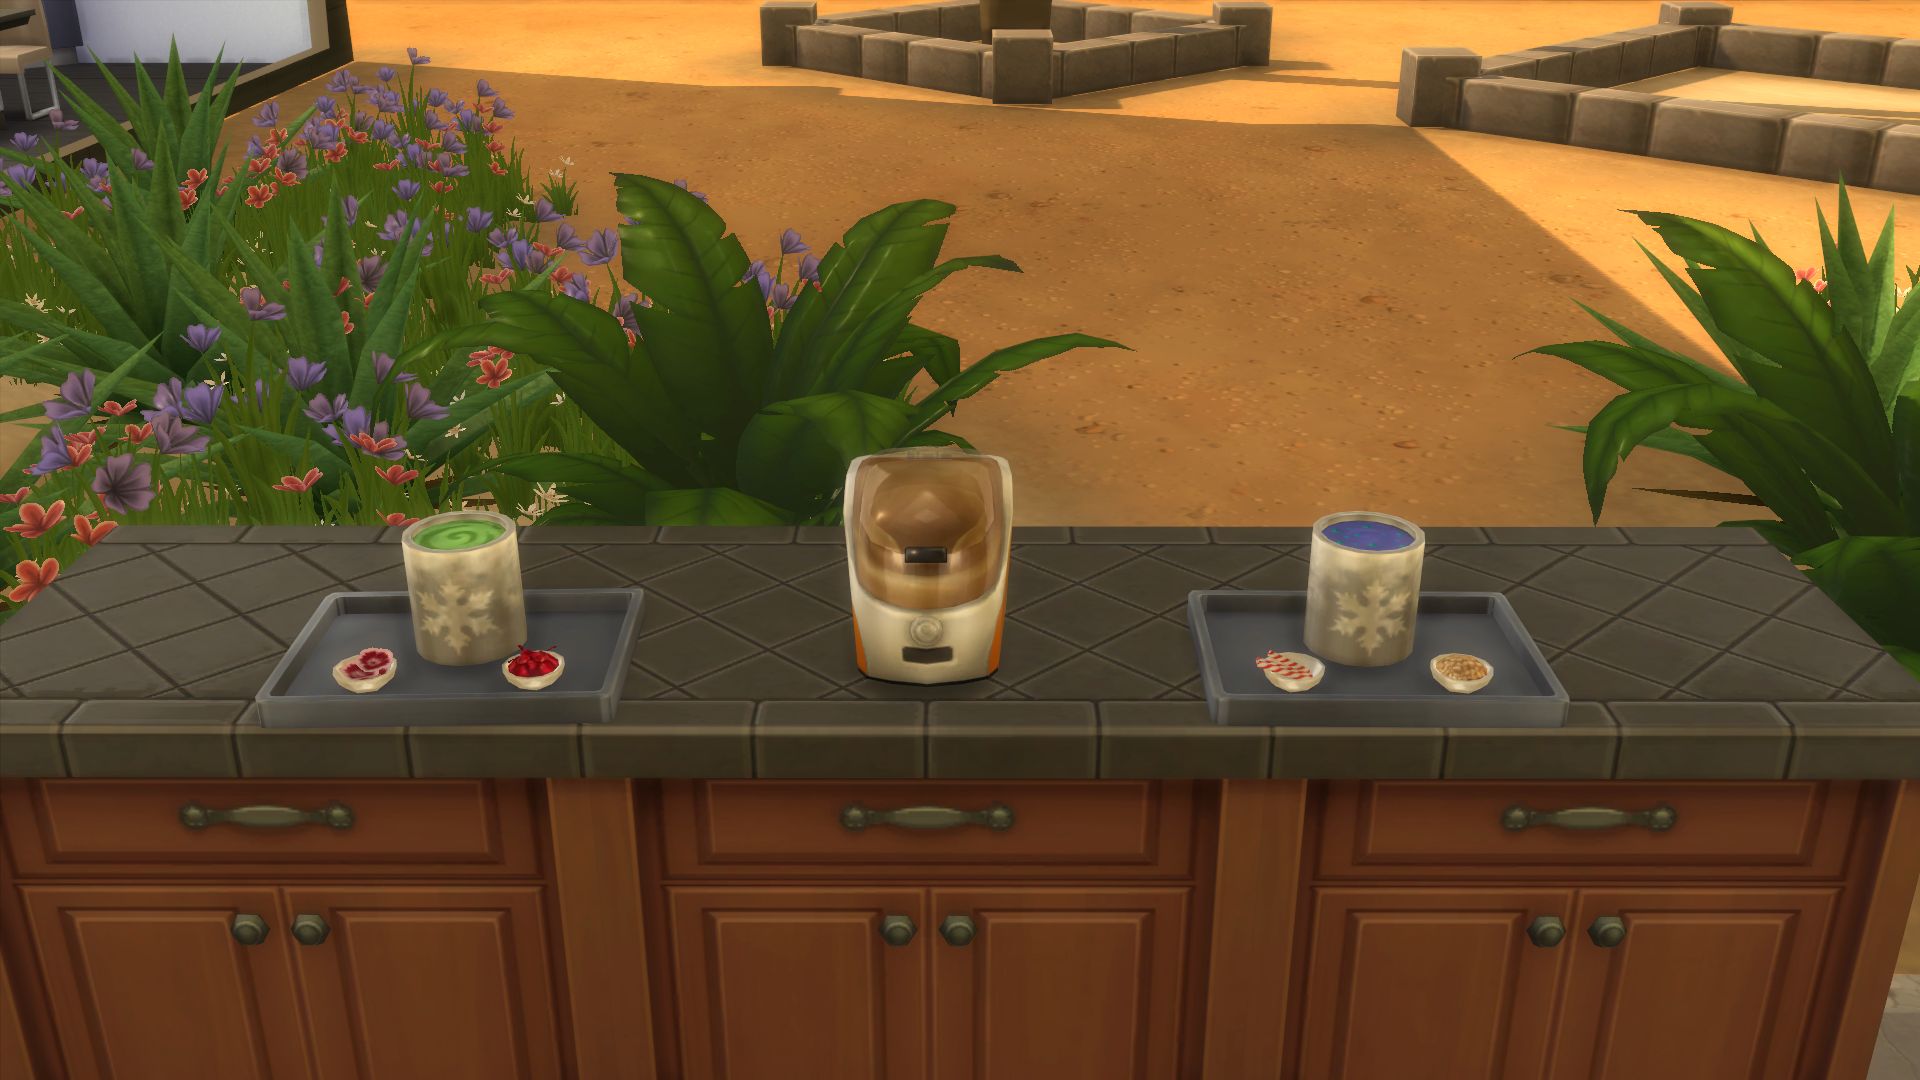 The Sims 4 Cool Kitchen Guide